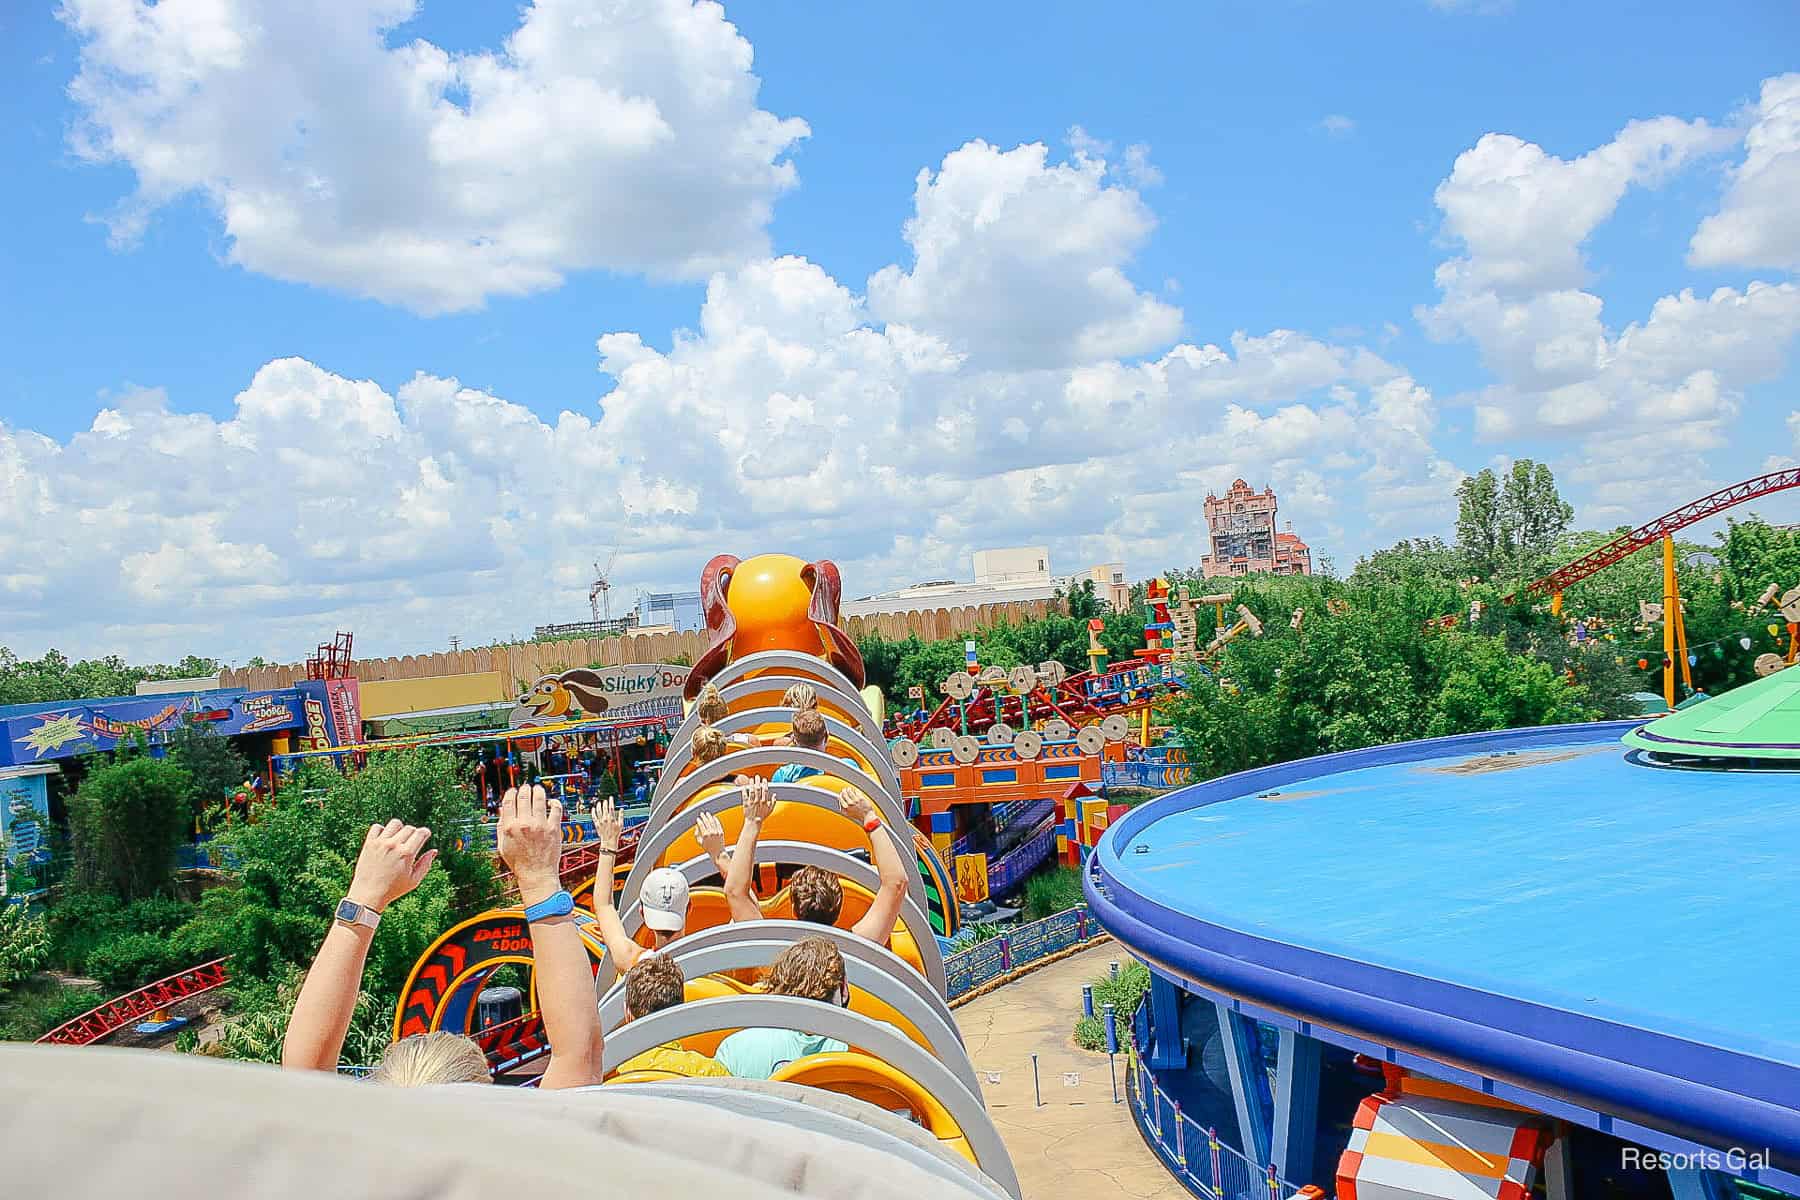 a view of the Tower of Terror over the fence of Andy's backyard on Slinky Dog Dash 